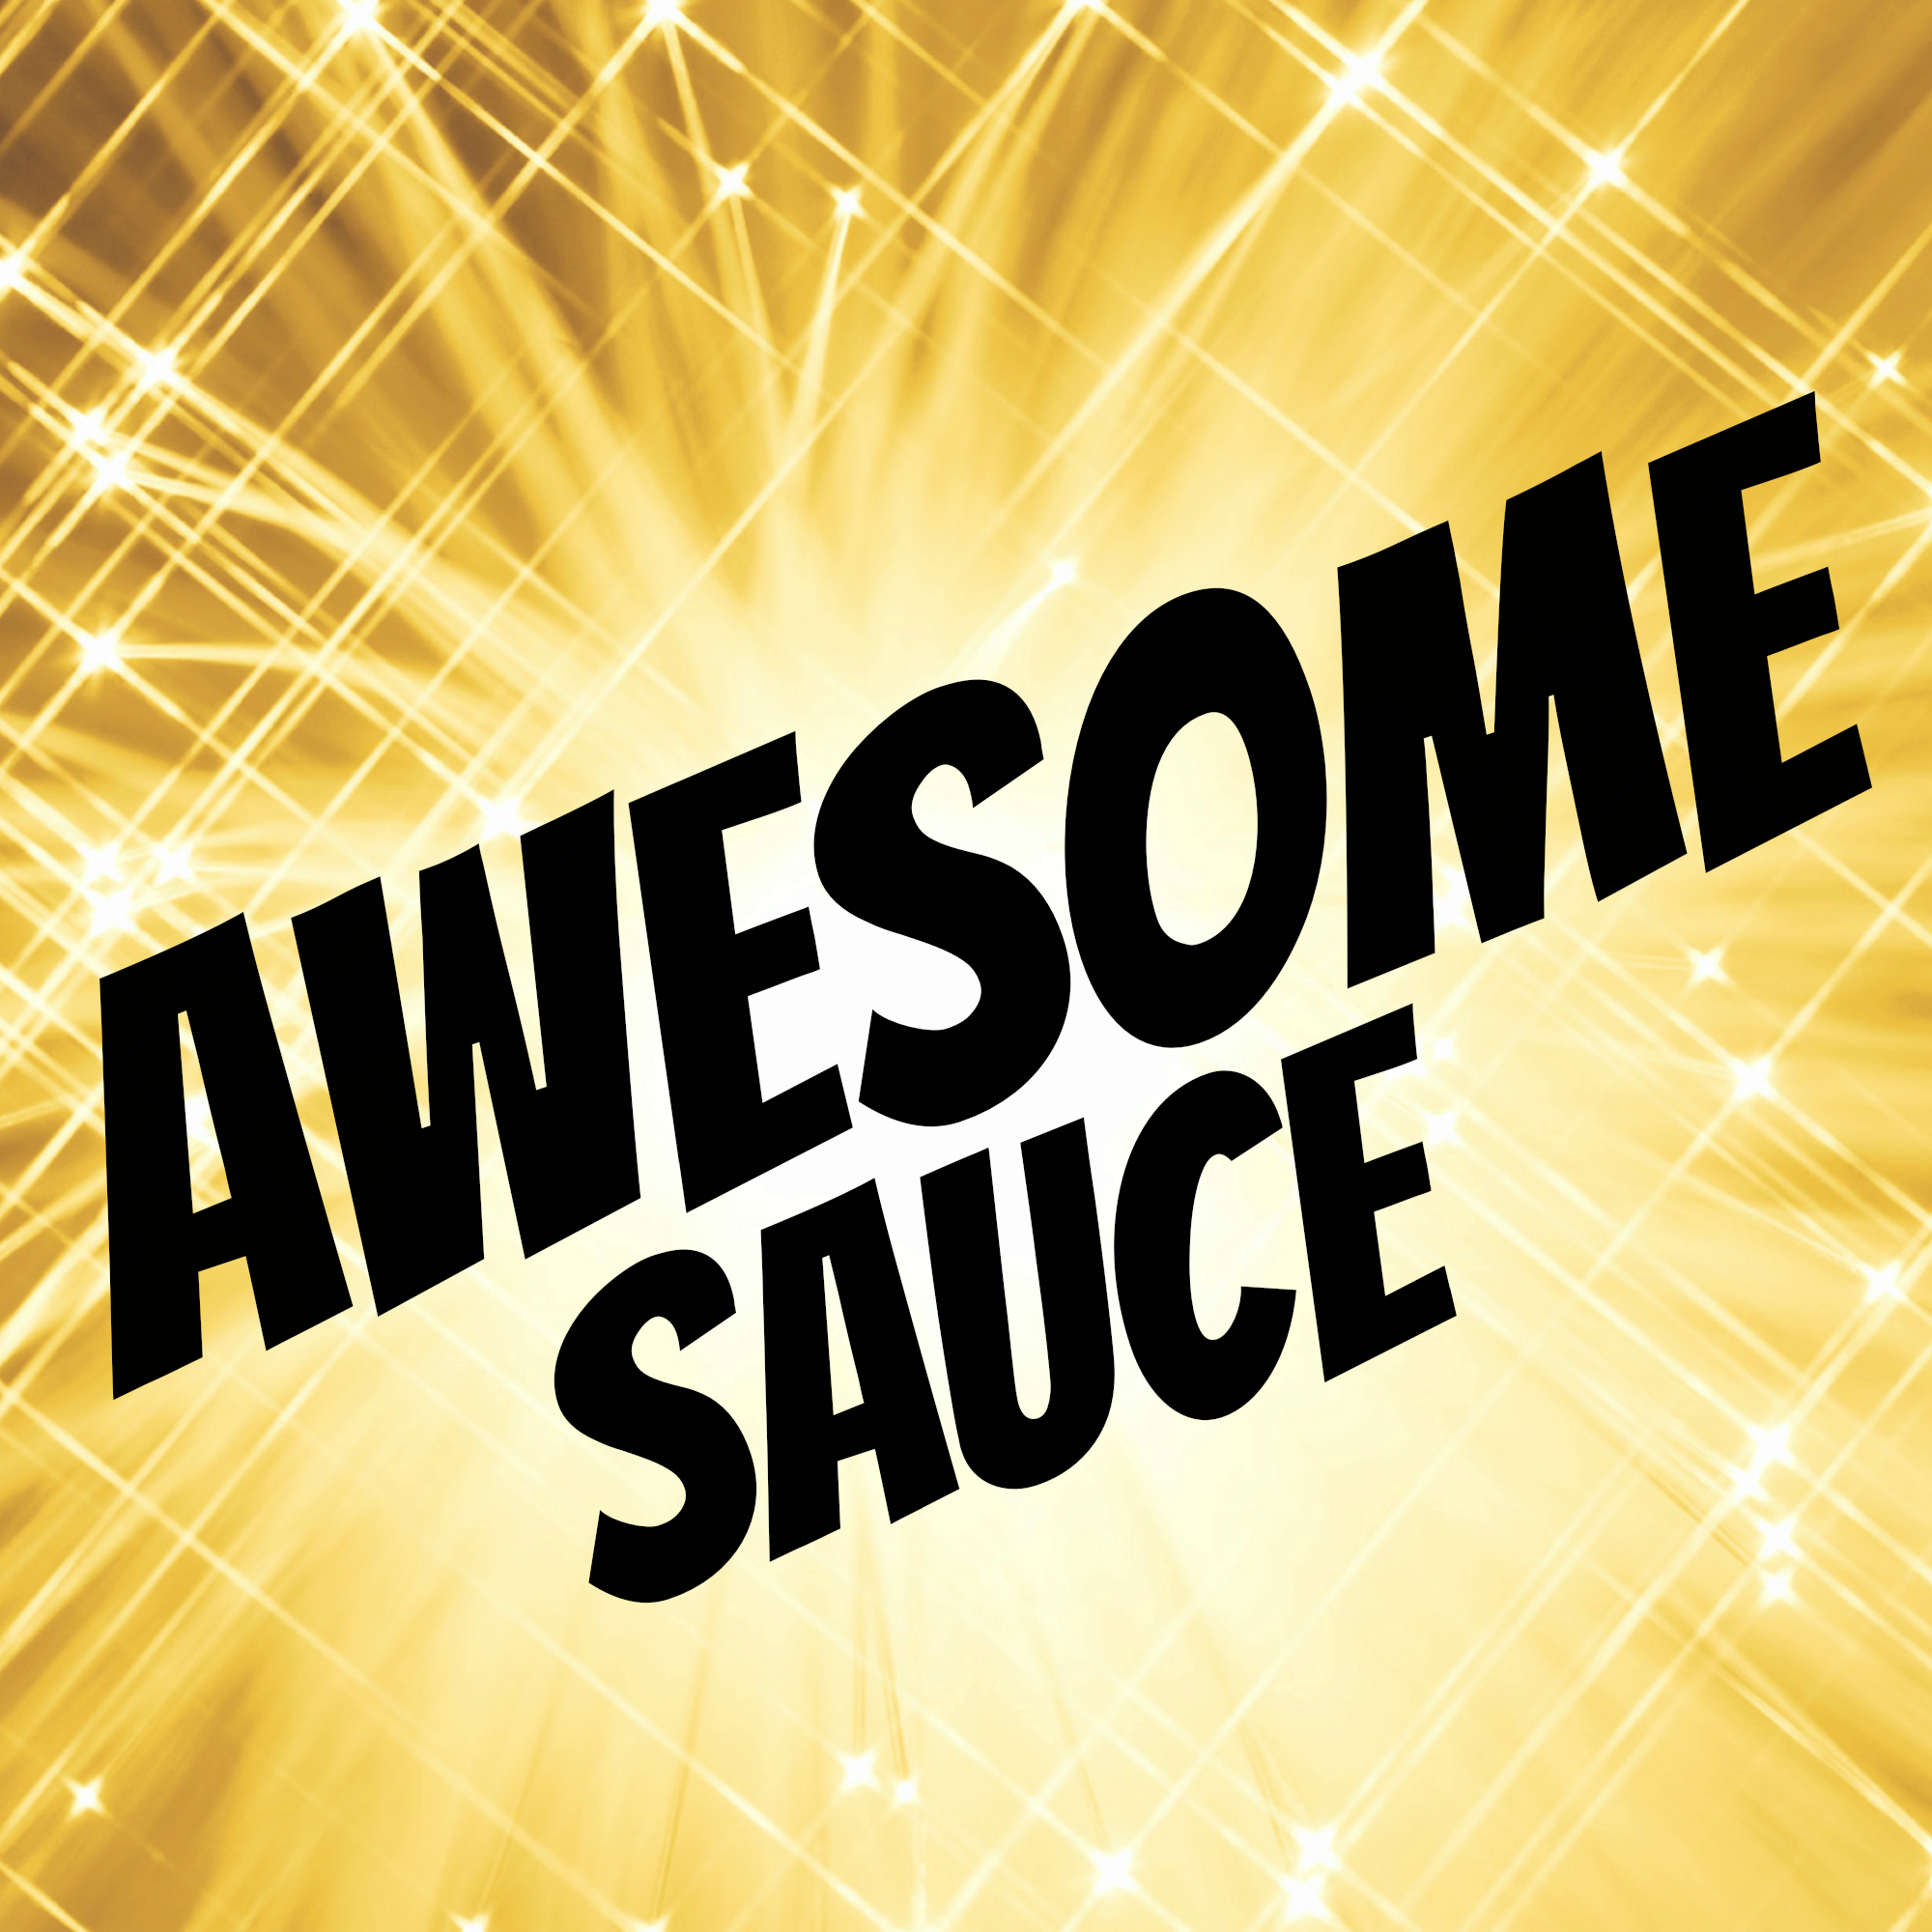 Awesome Sauce: A Recipe - crafterhours
